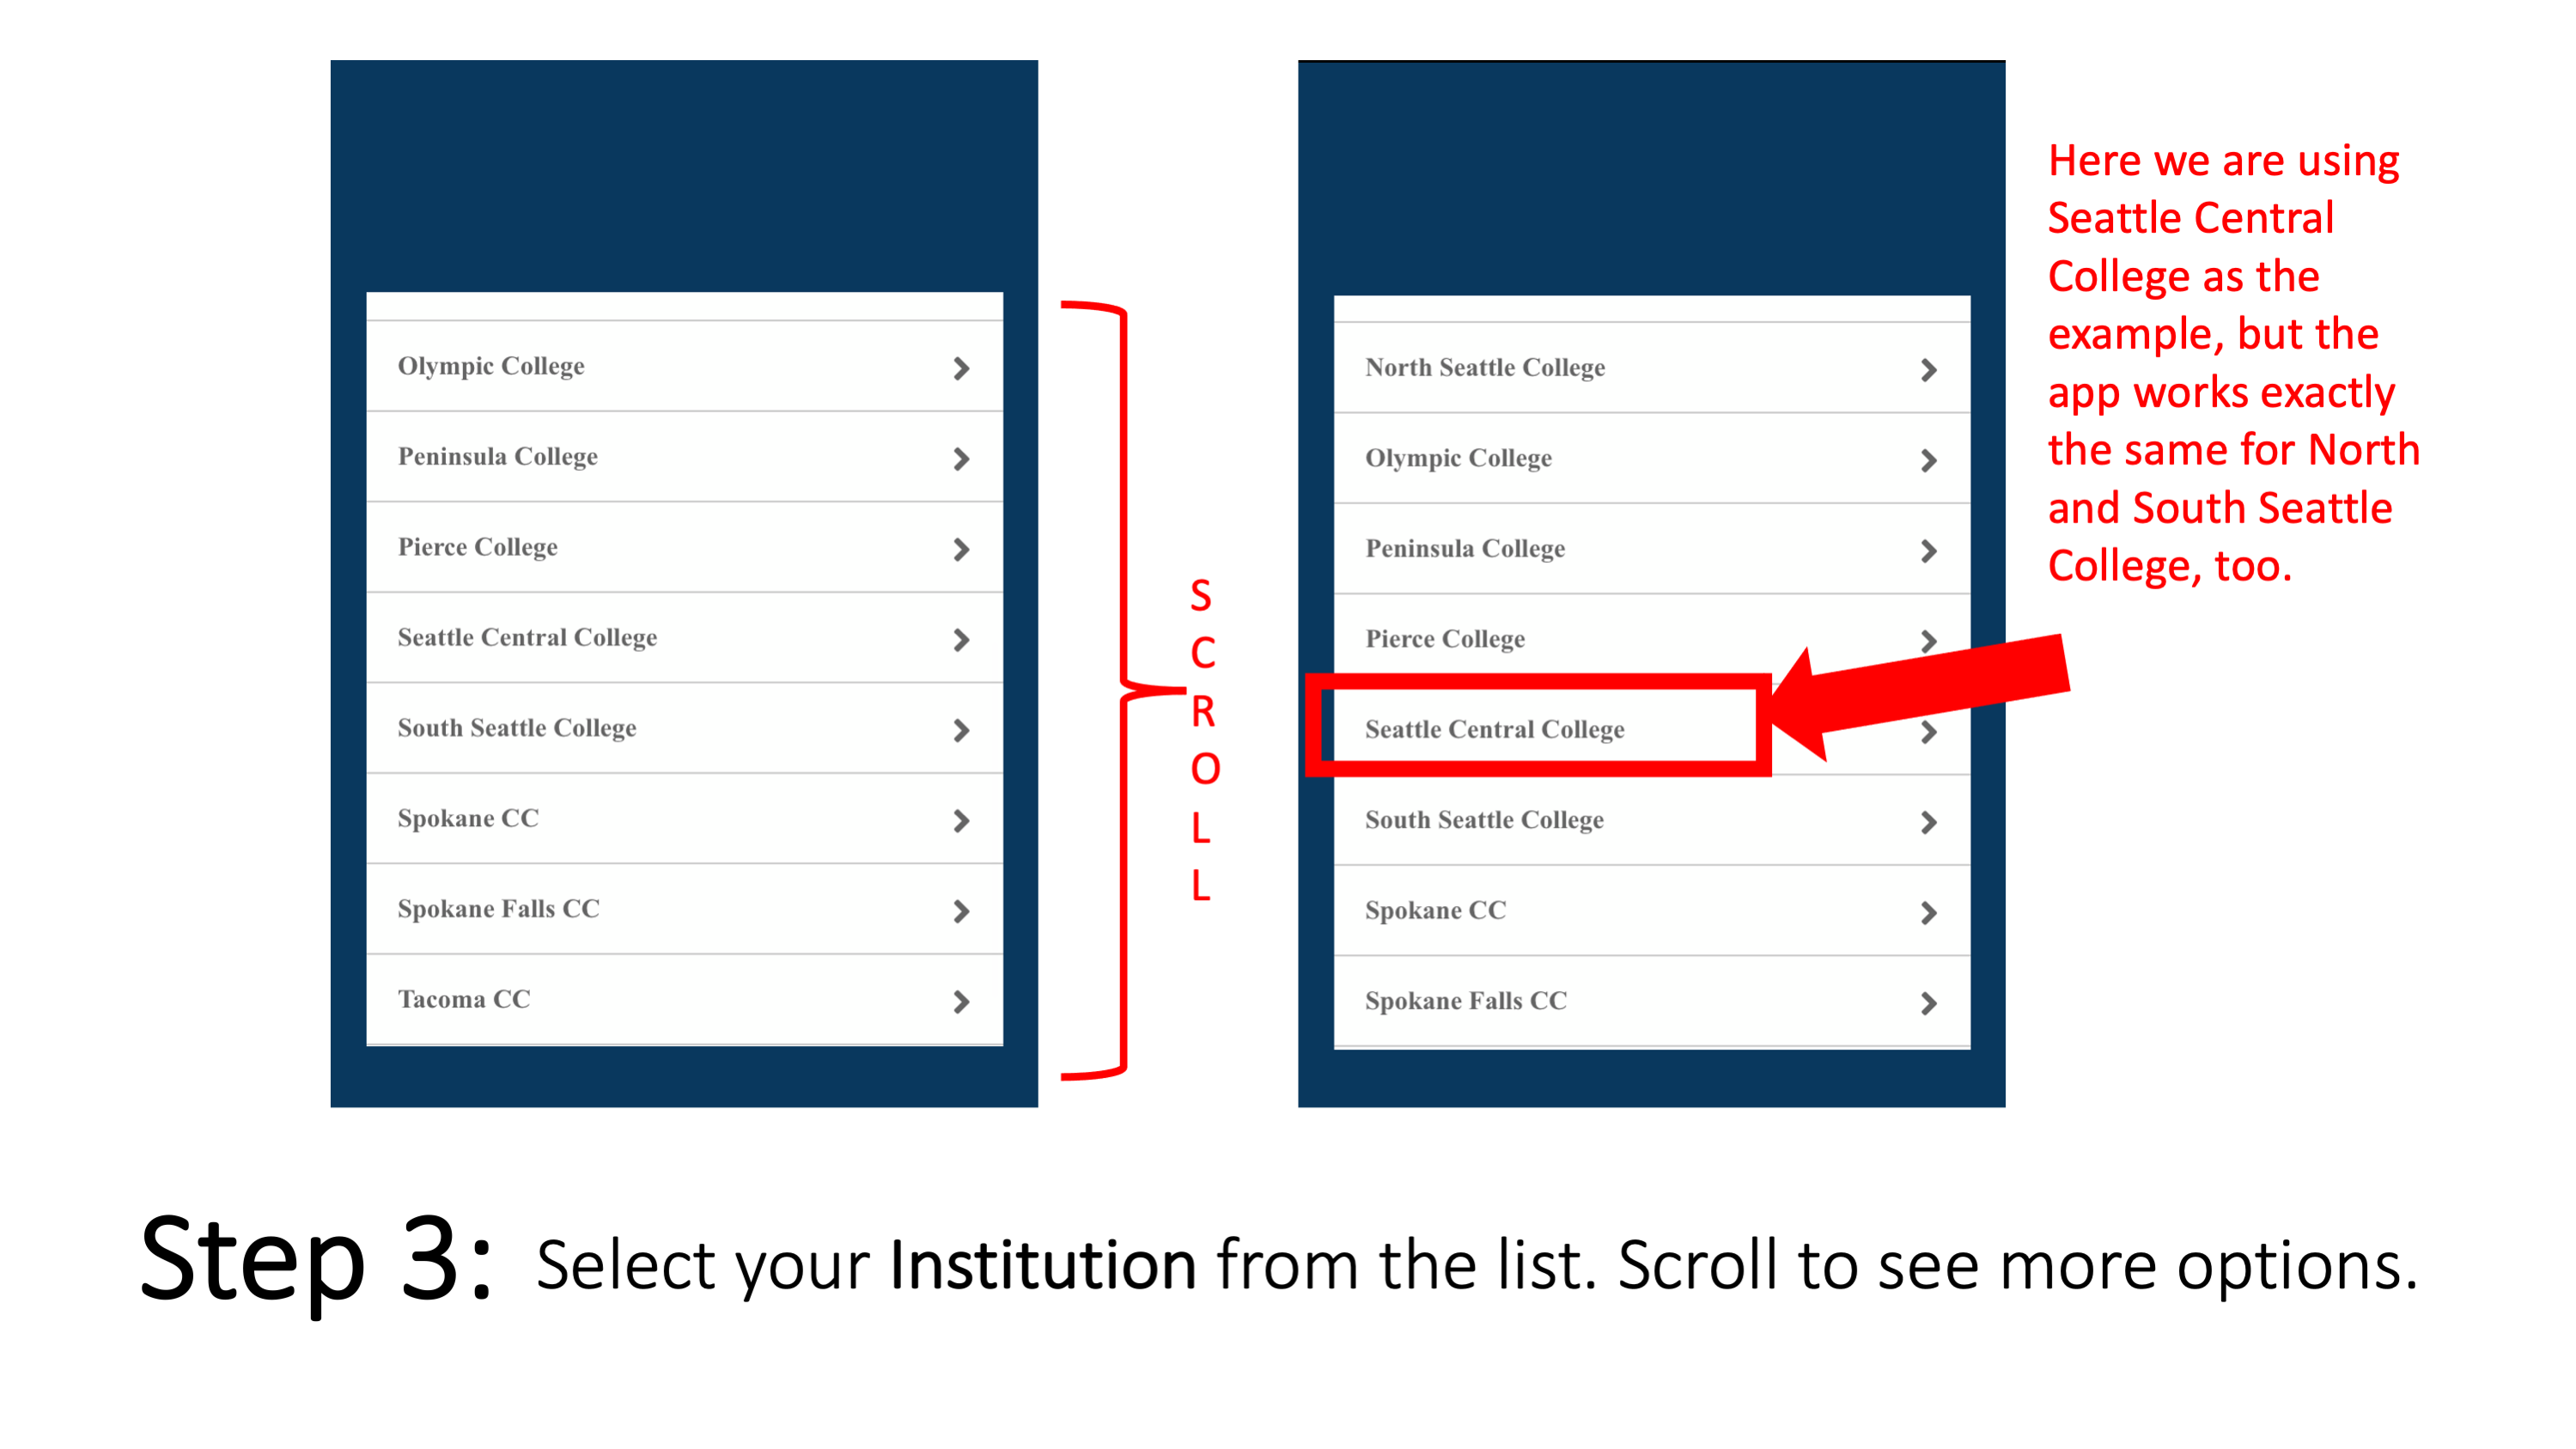 Select your Institution from the list. Scroll to see more options.